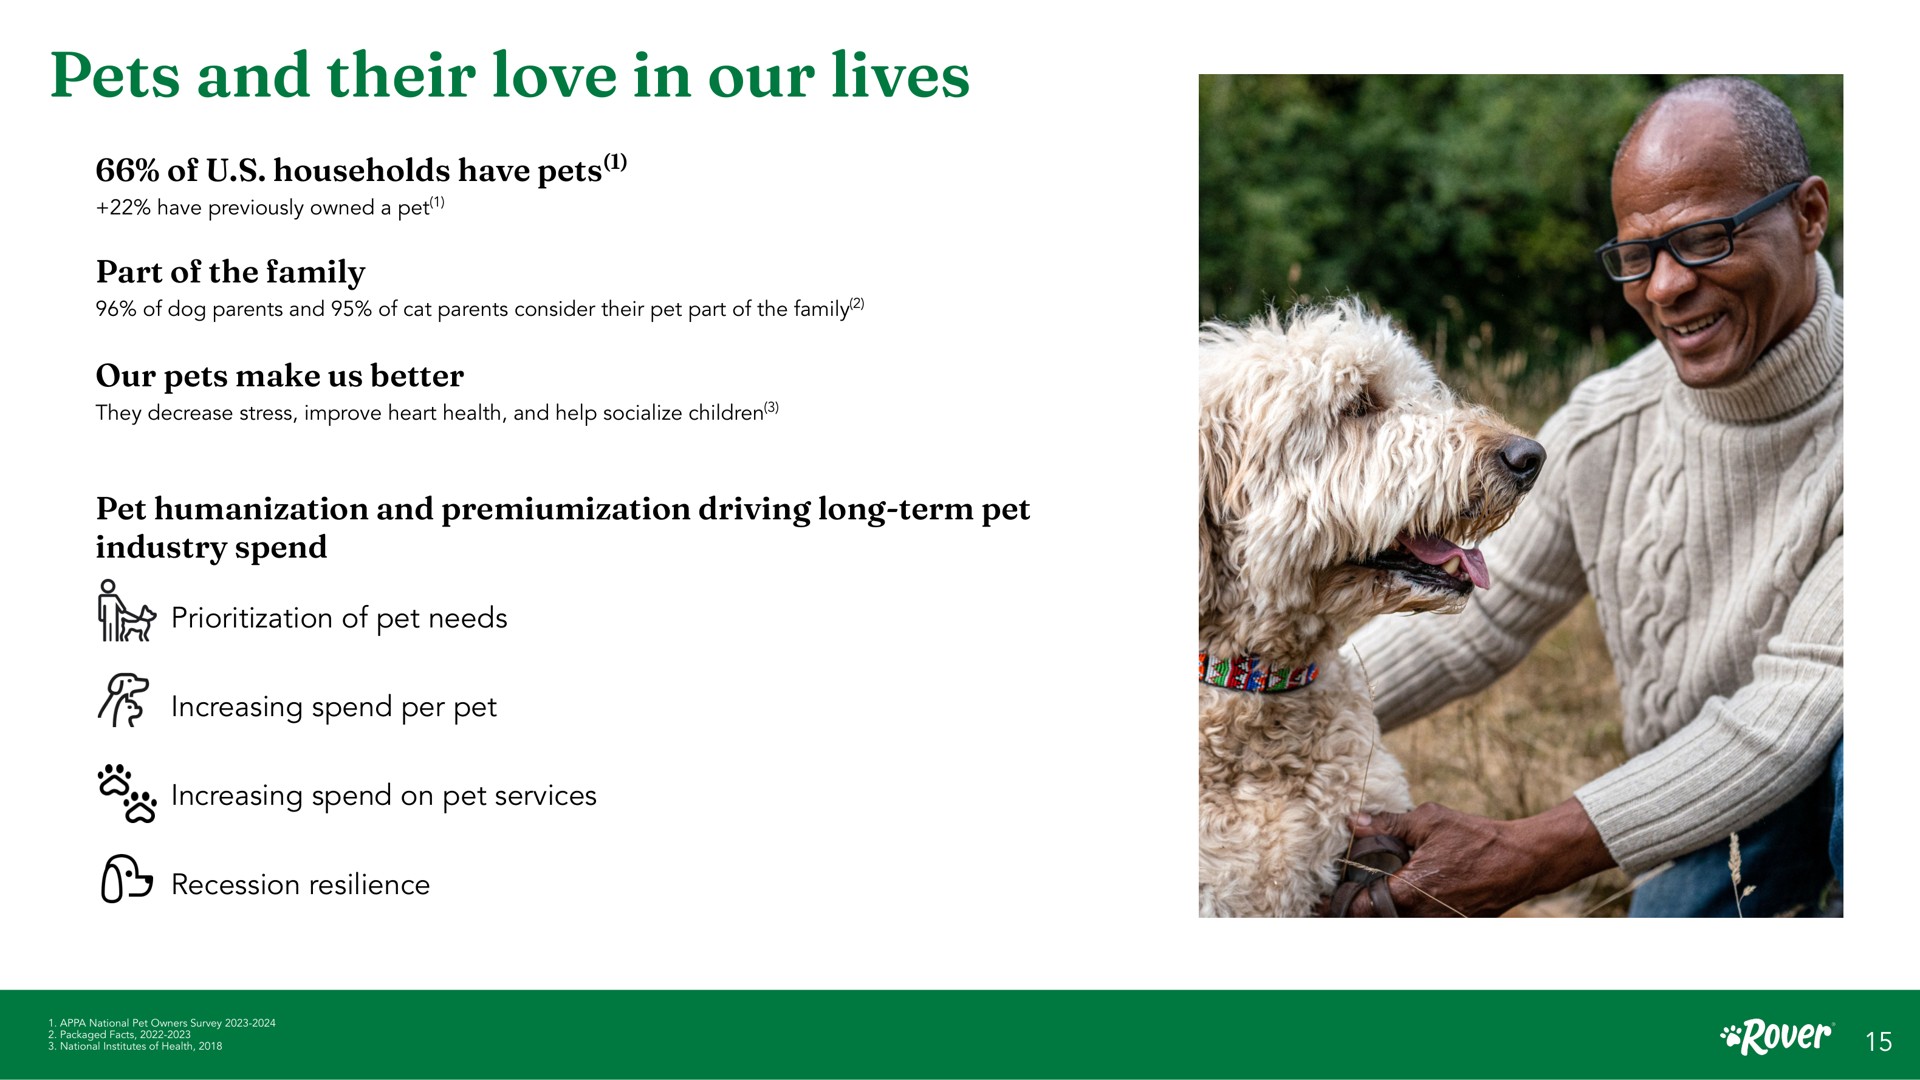 pets and their love in our lives of households have have previously owned a pet part of the family of dog parents of cat parents consider pet part of the family make us better they decrease stress improve heart health help socialize children pet humanization driving long term pet industry spend is of pet needs increasing spend per pet increasing spend on pet services recession resilience cola mail cord national pet owners survey packaged facts i | Rover